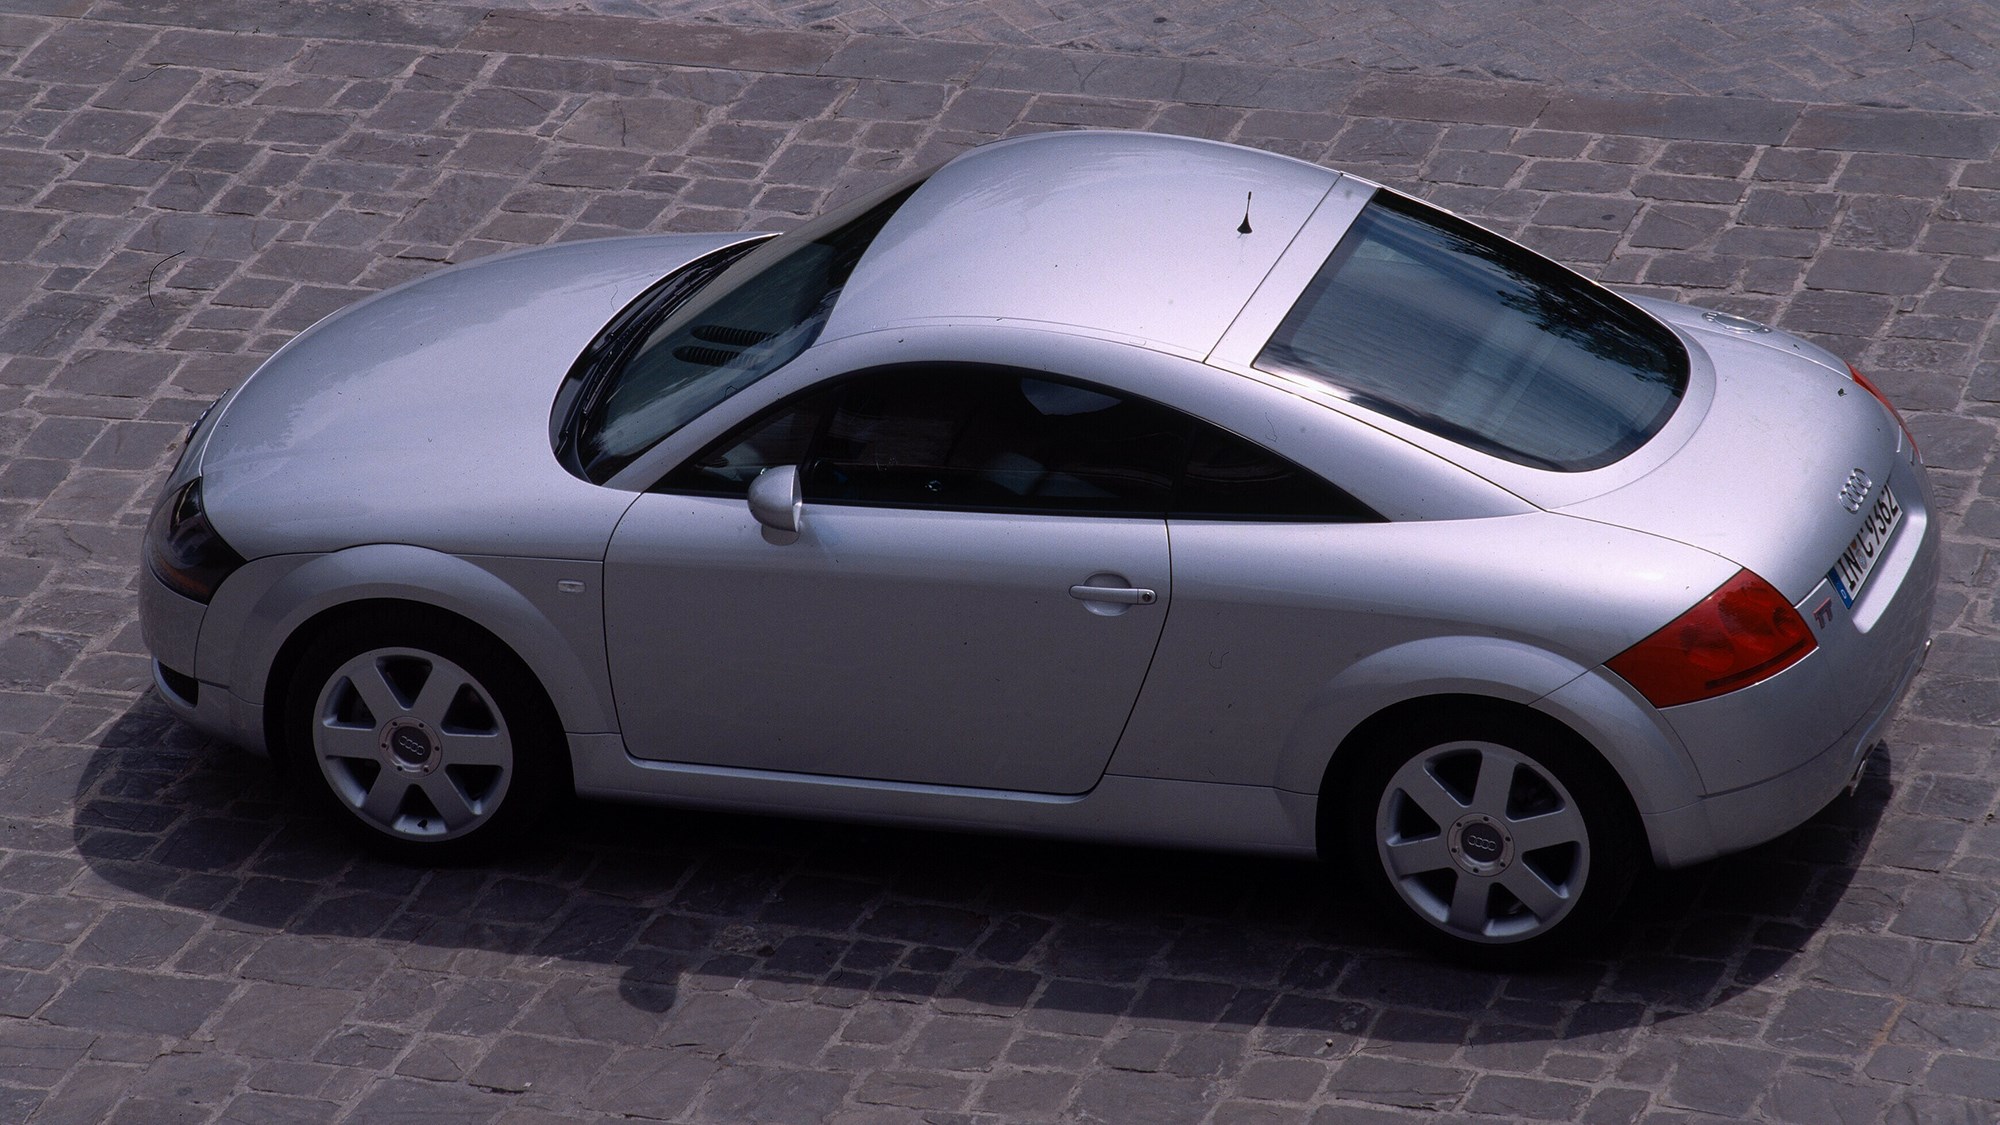 25 years of the Audi TT: the car that kickstarted Audi's design